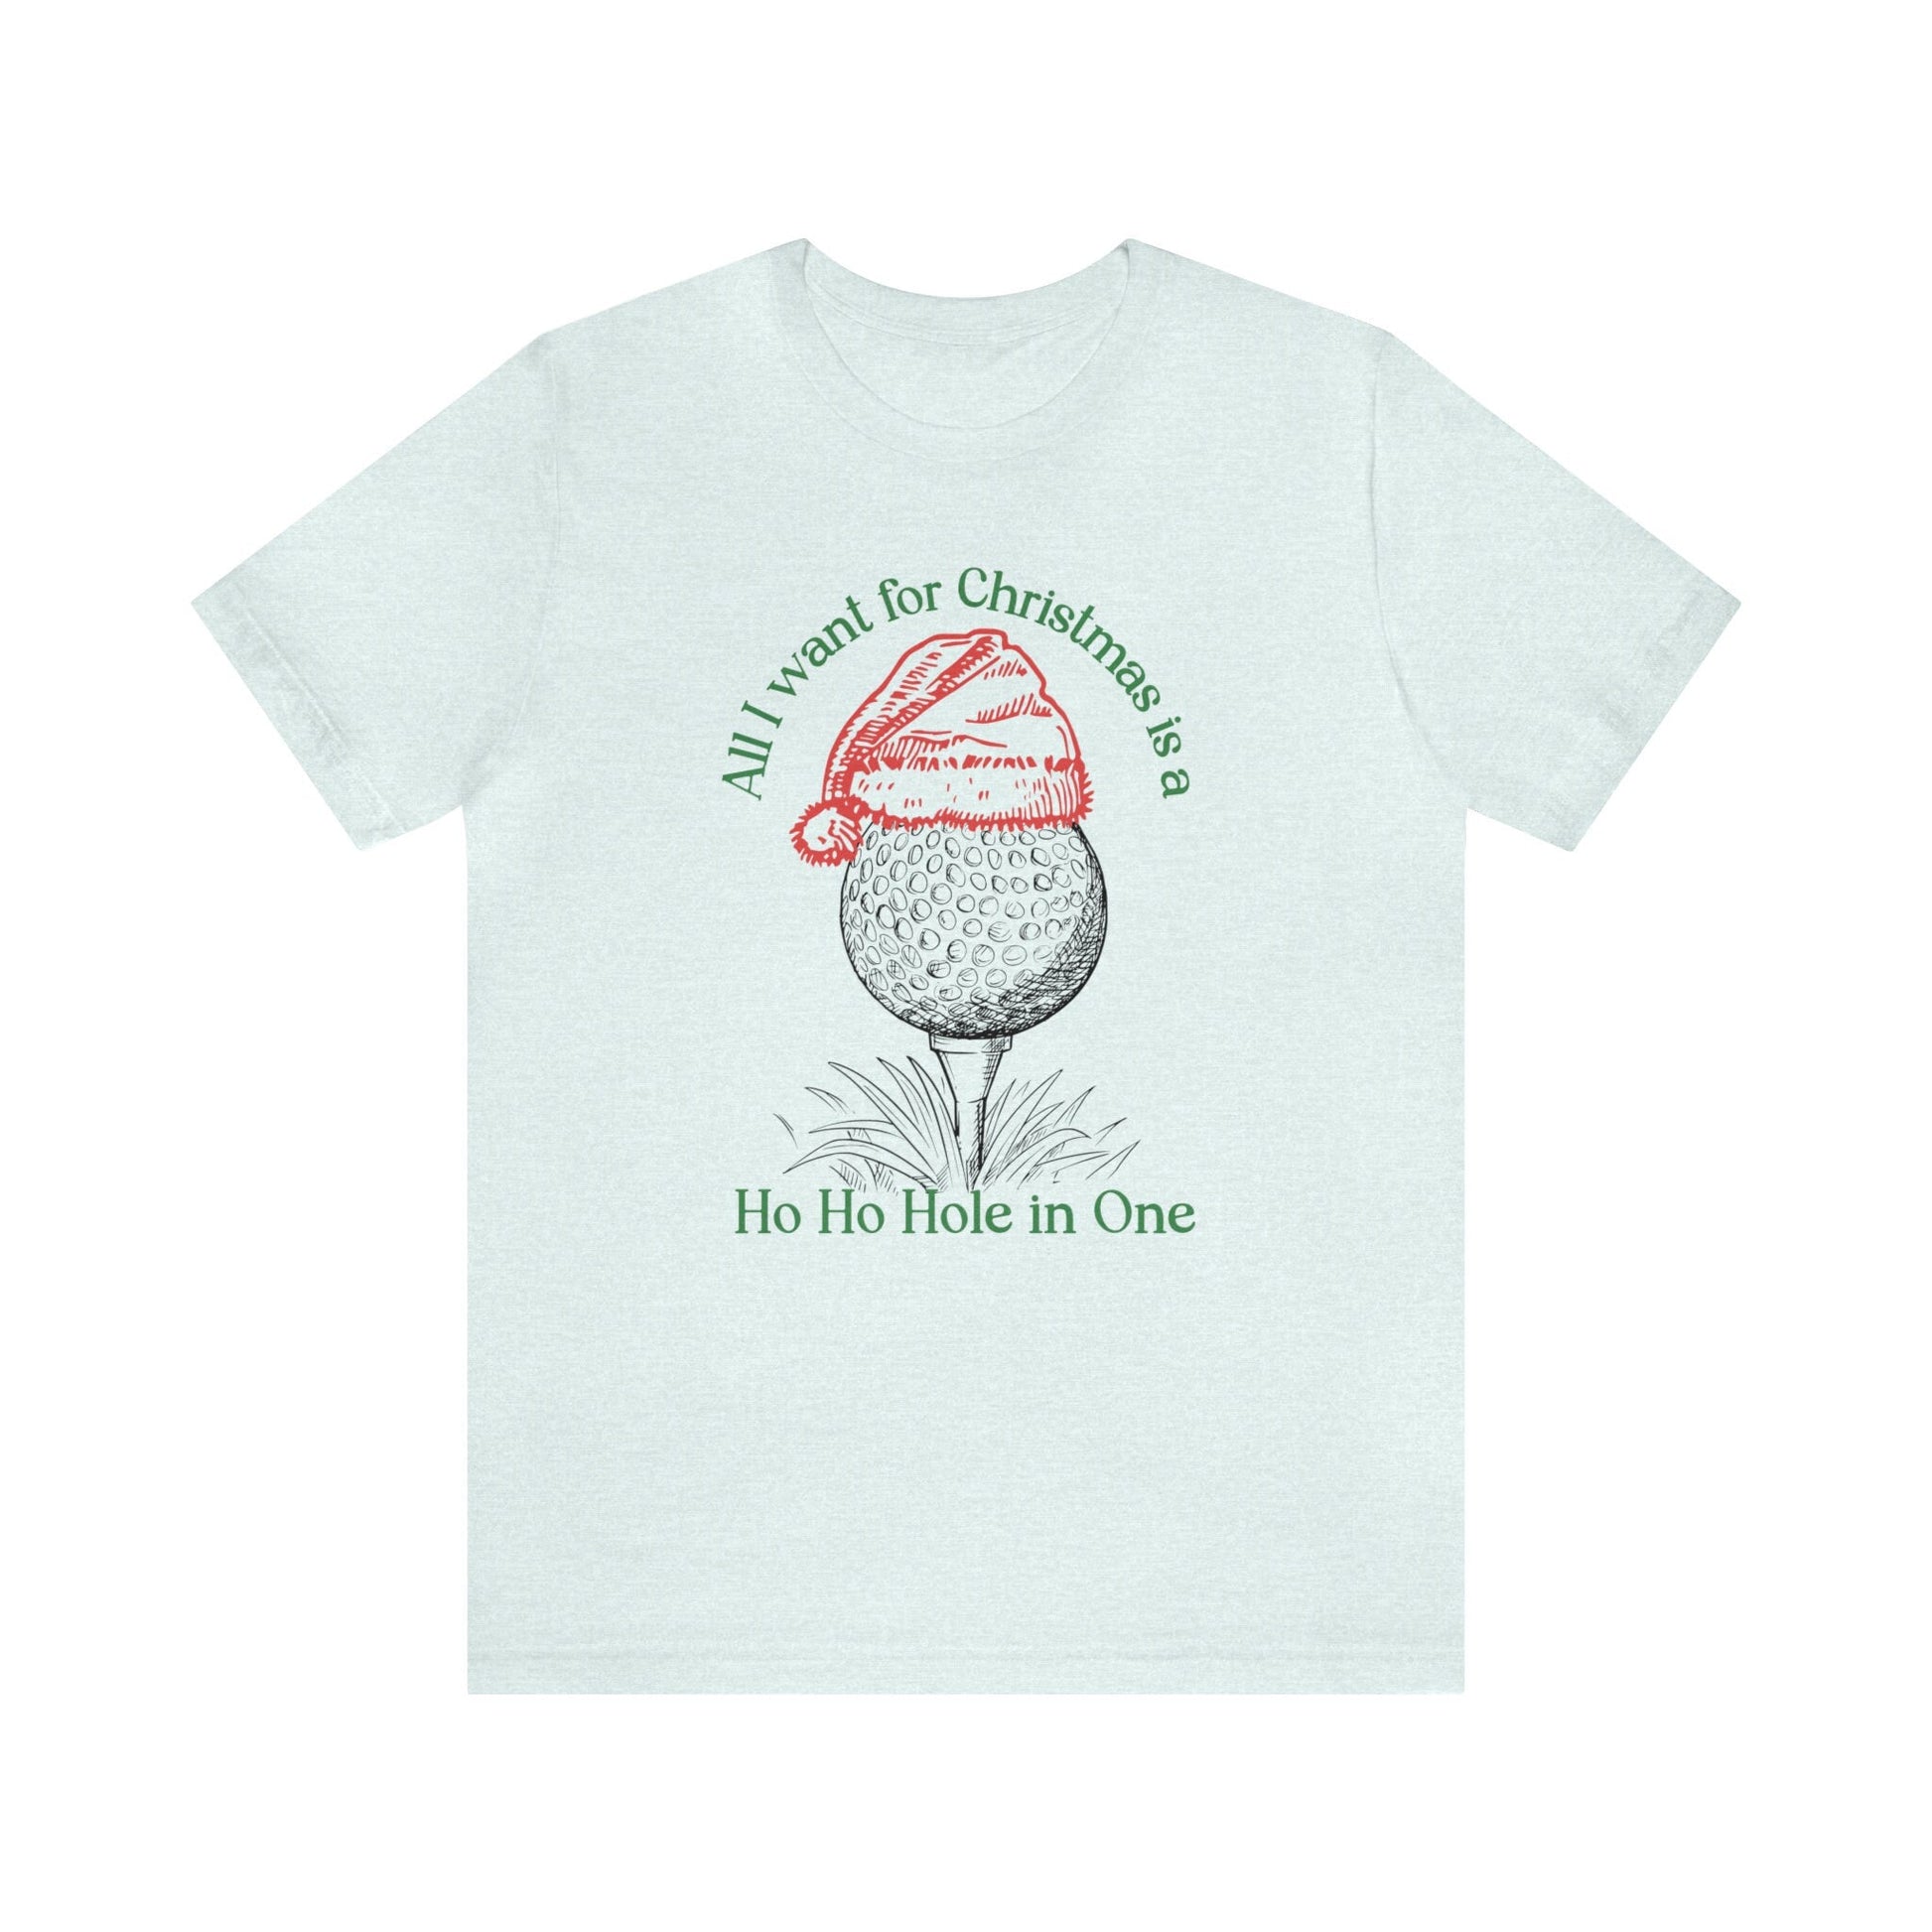 All I Want For Christmas Is A Ho Ho Hole In One Tshirt, Xmas Golf Tee, Gift For Golfer, Present For Dad Husband Brother